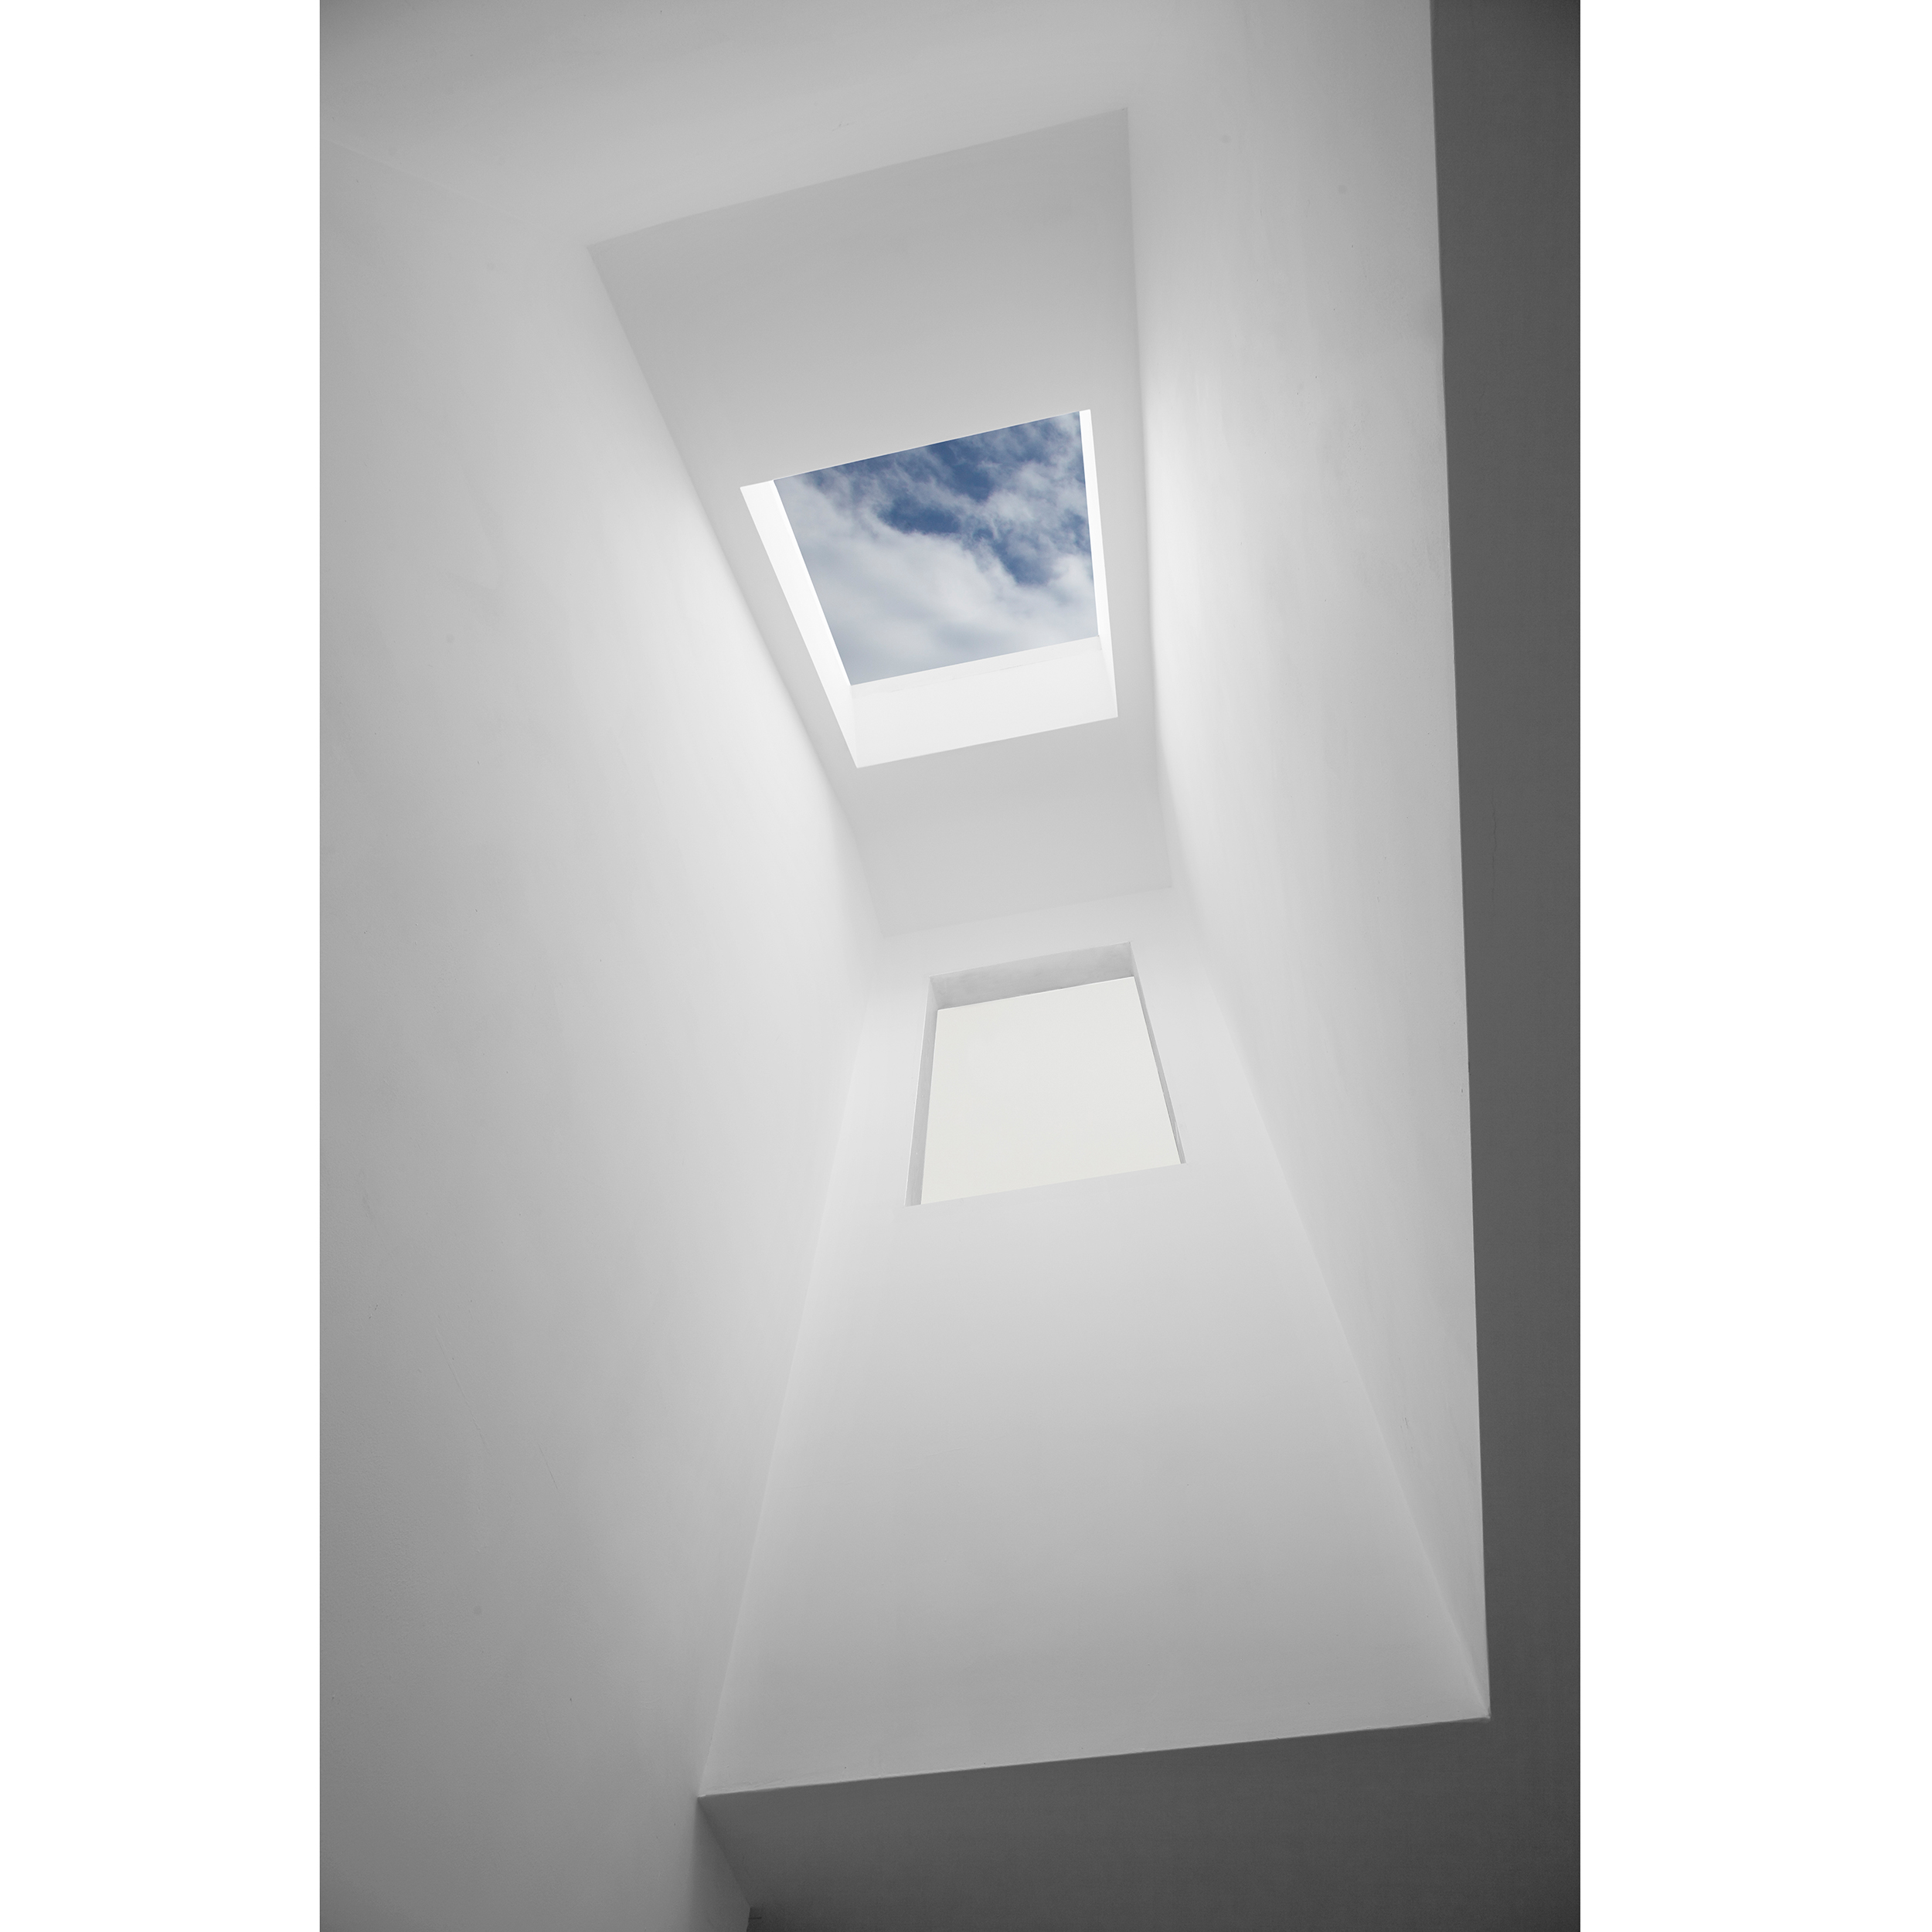 View of clouds through roof light